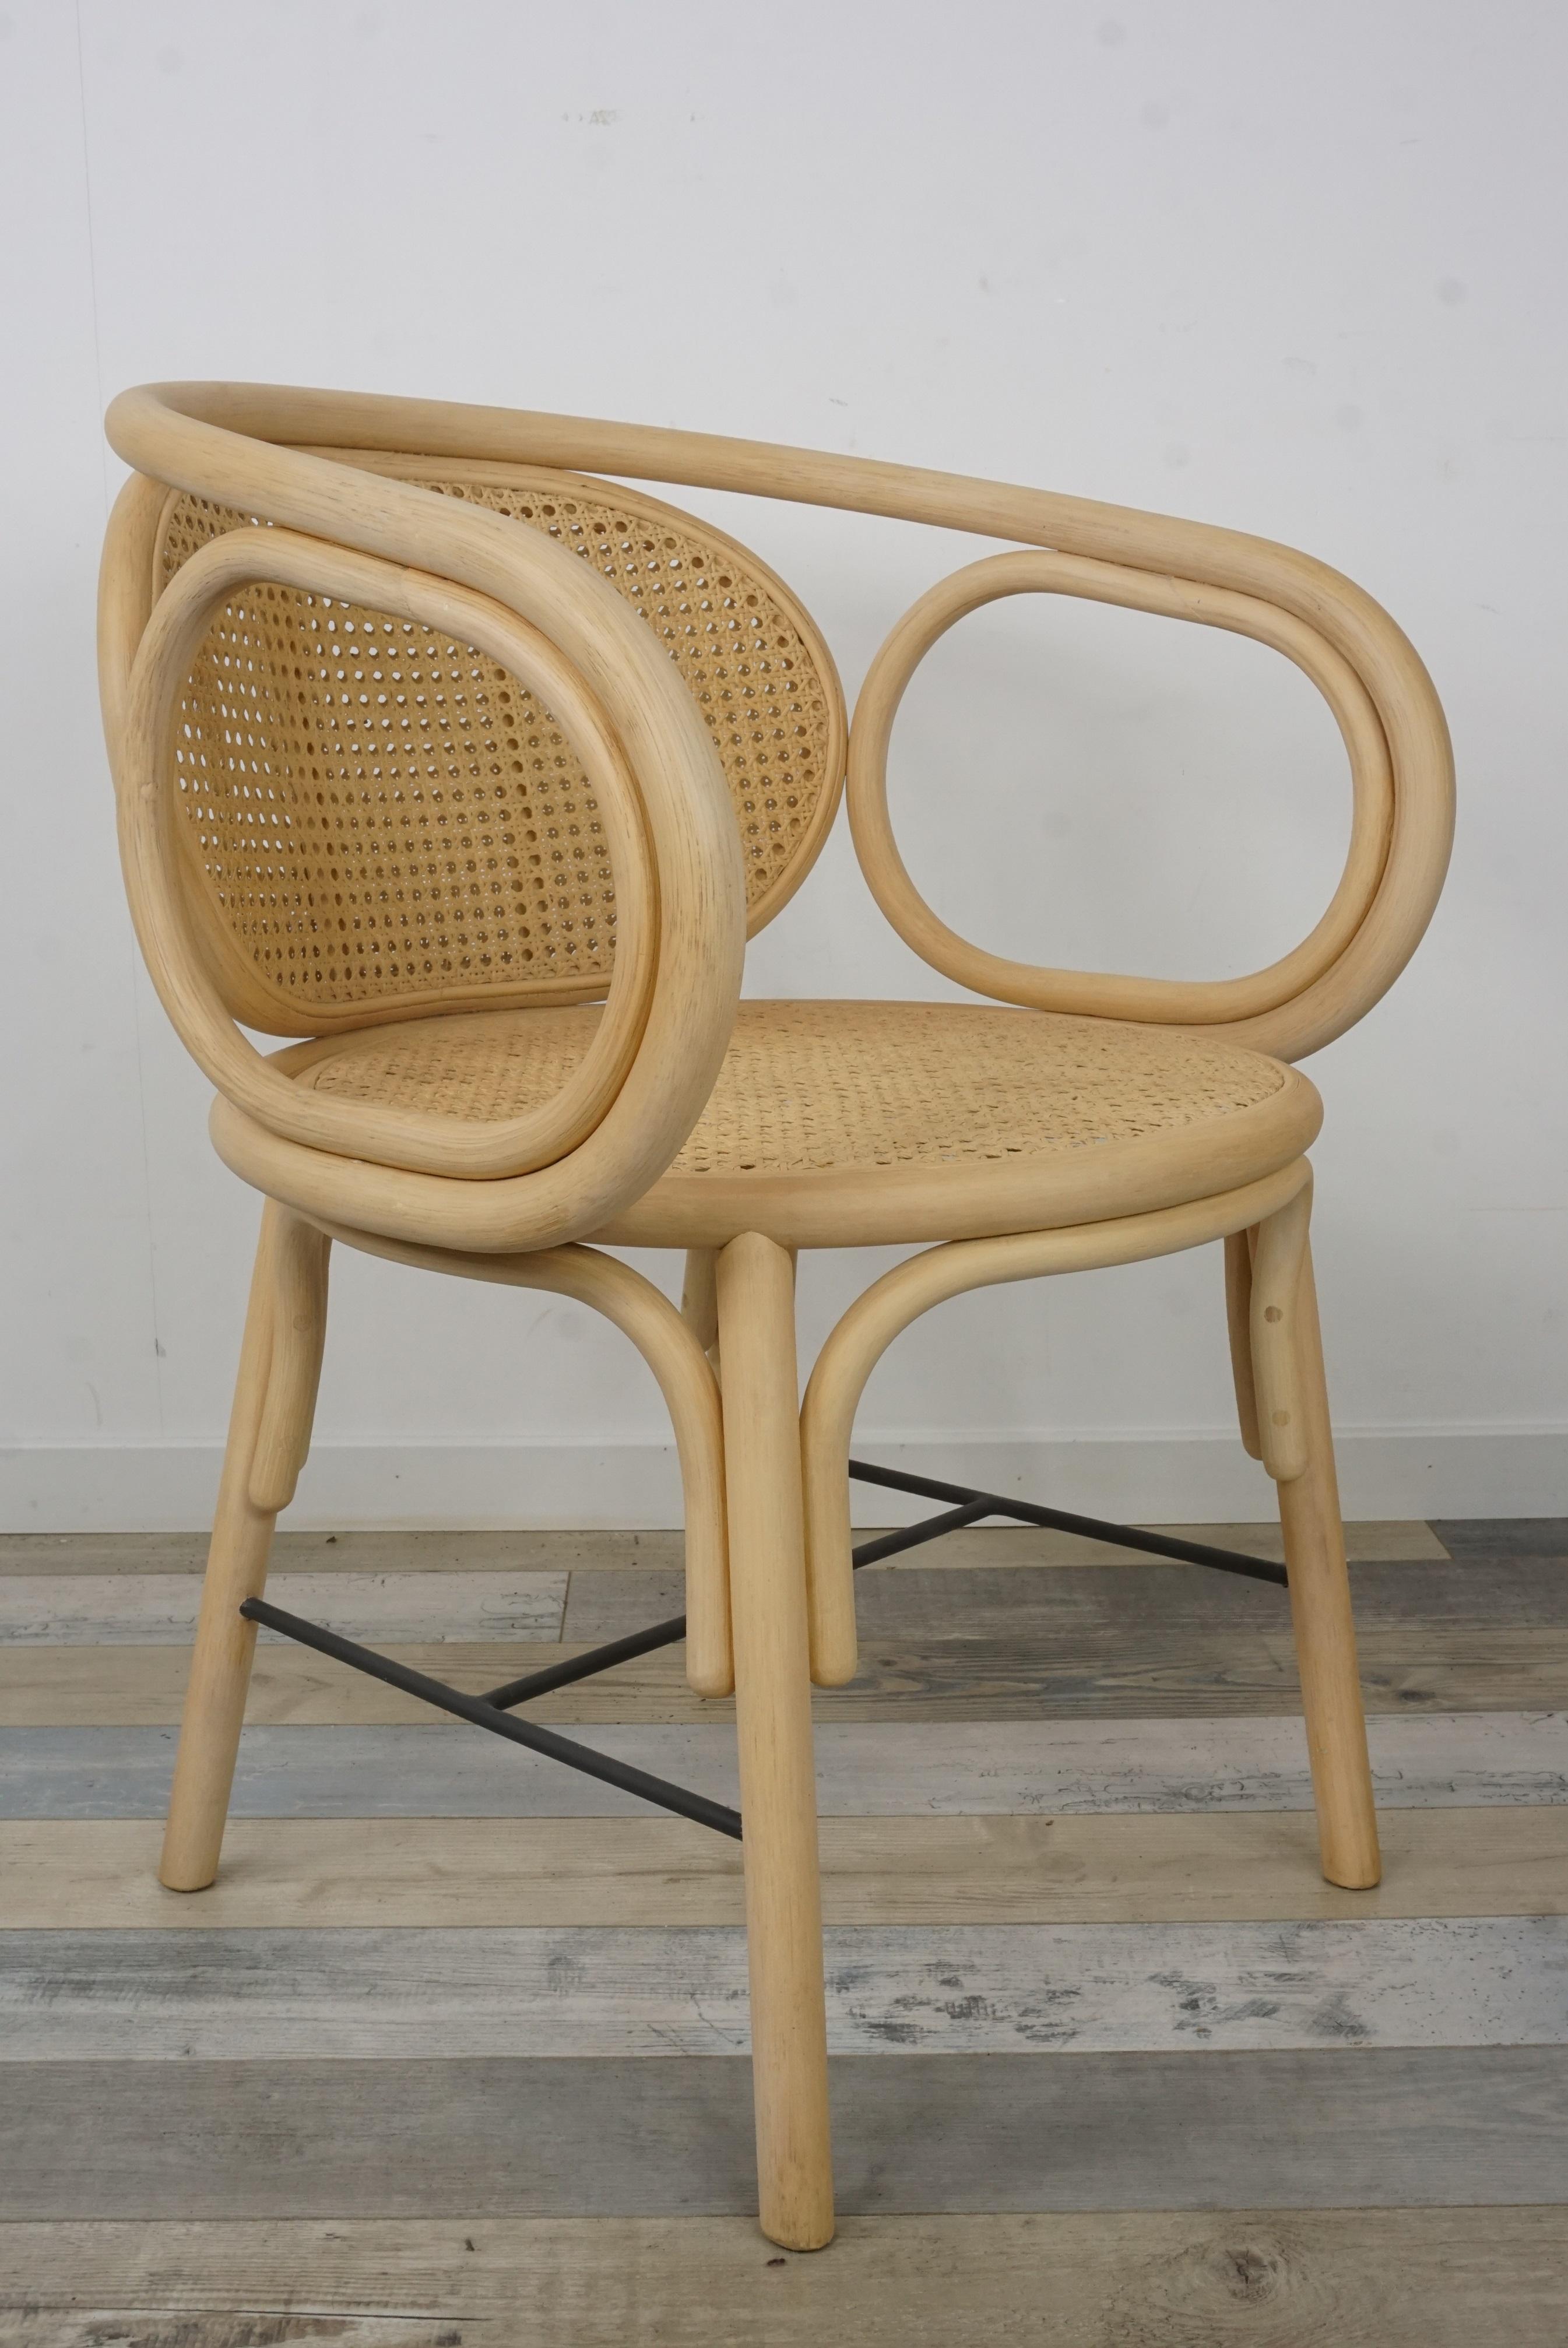 Rattan and woven cane armchair French modern design combining modernity and tradition, design lines, graphic and timelessness this armchair is composed of a robust rattan and airy structure, woven cane and back adorned with a comfy mustard